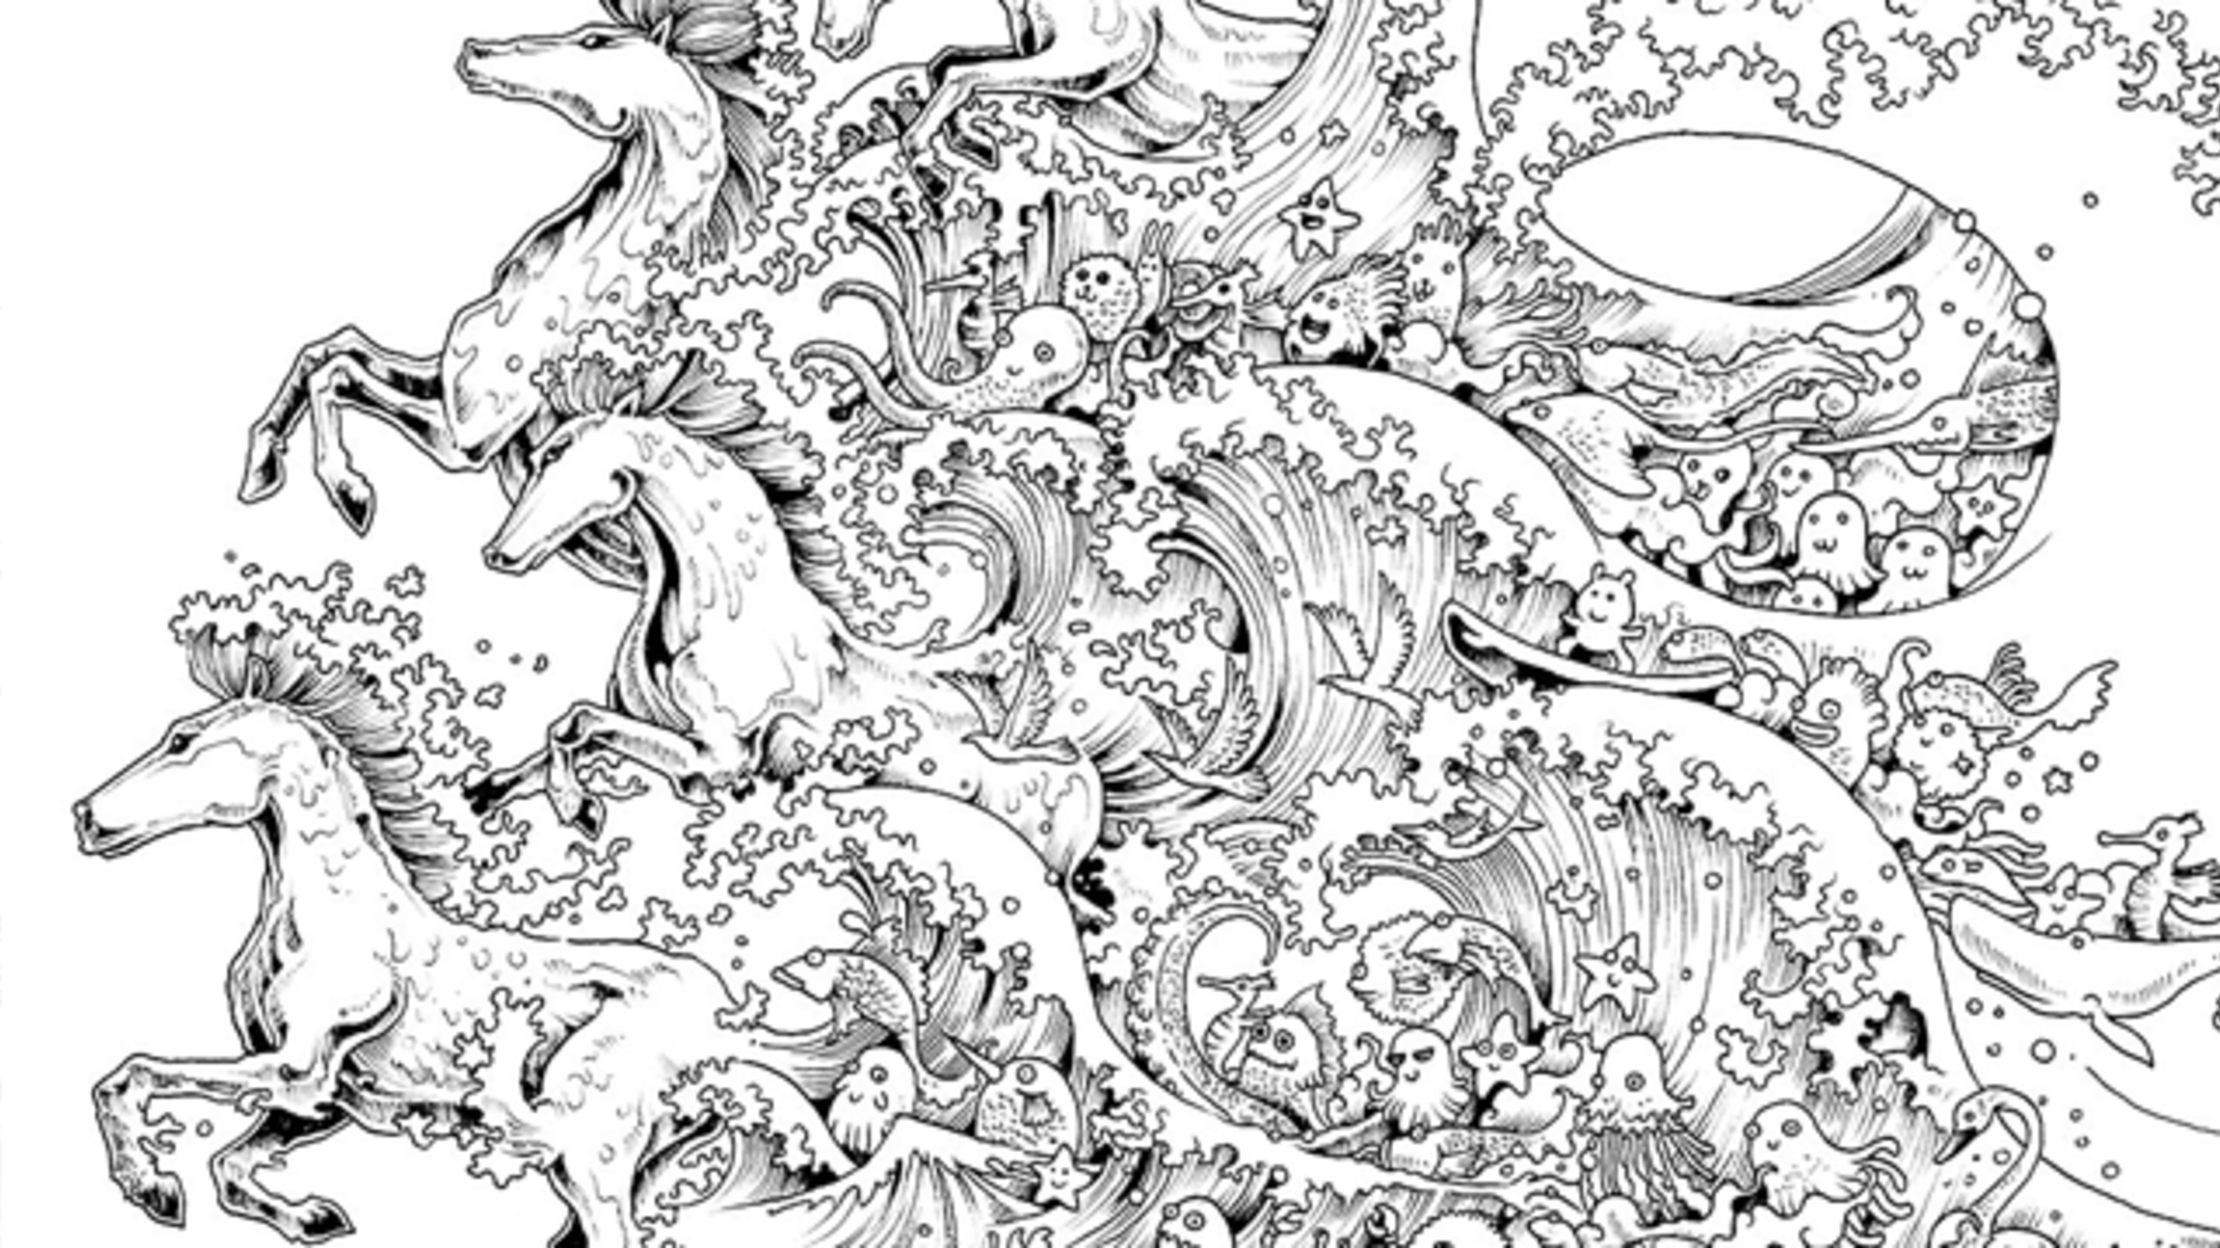 Download 10 Intricate Adult Coloring Books to Help You De-Stress ...